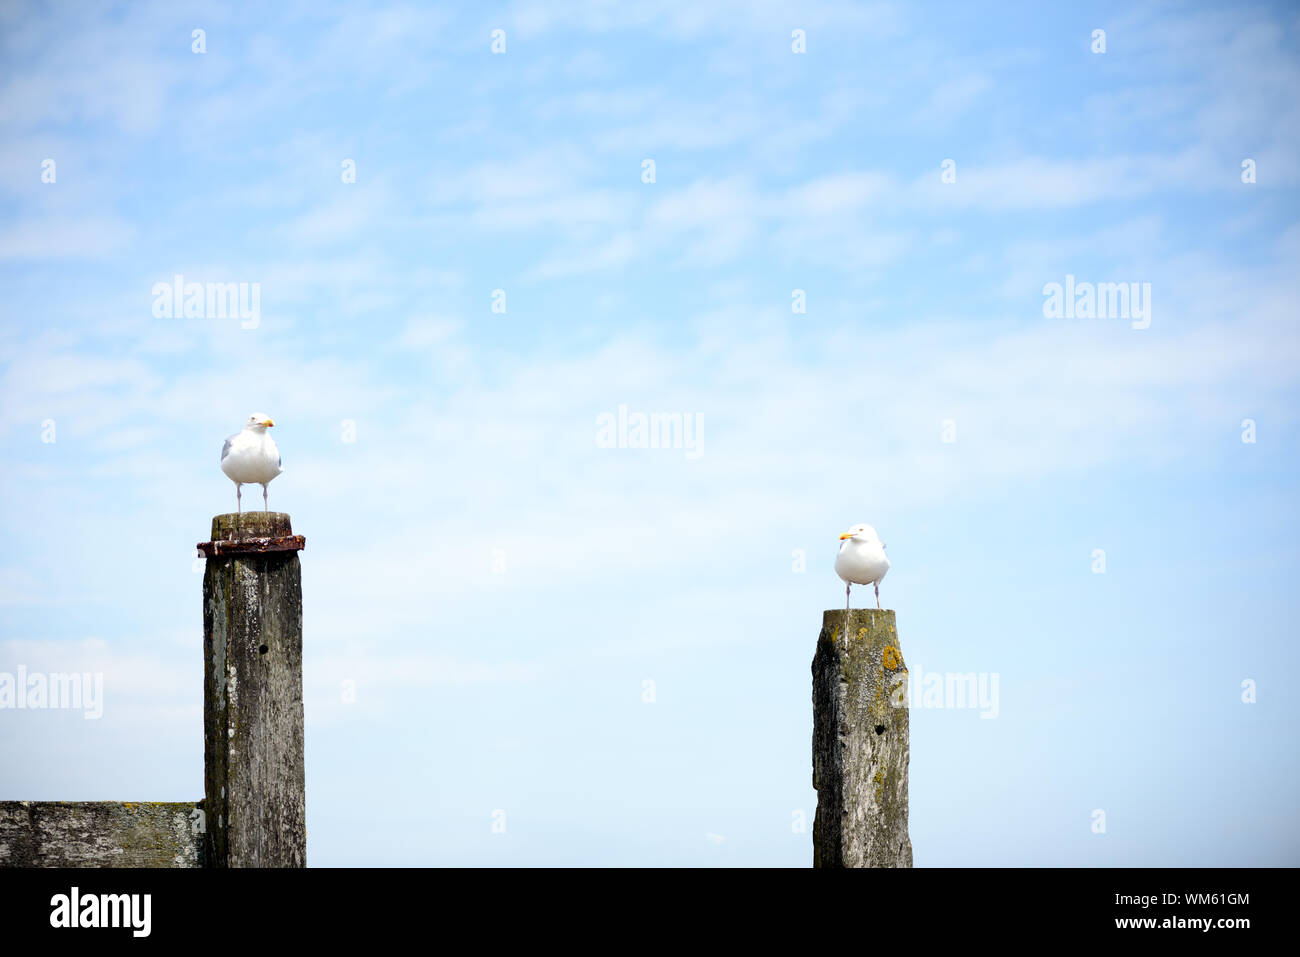 Two seagulls sitting on wooden posts in a summertime costal background with copyspace area for nature nautical sea based design and concepts Stock Photo